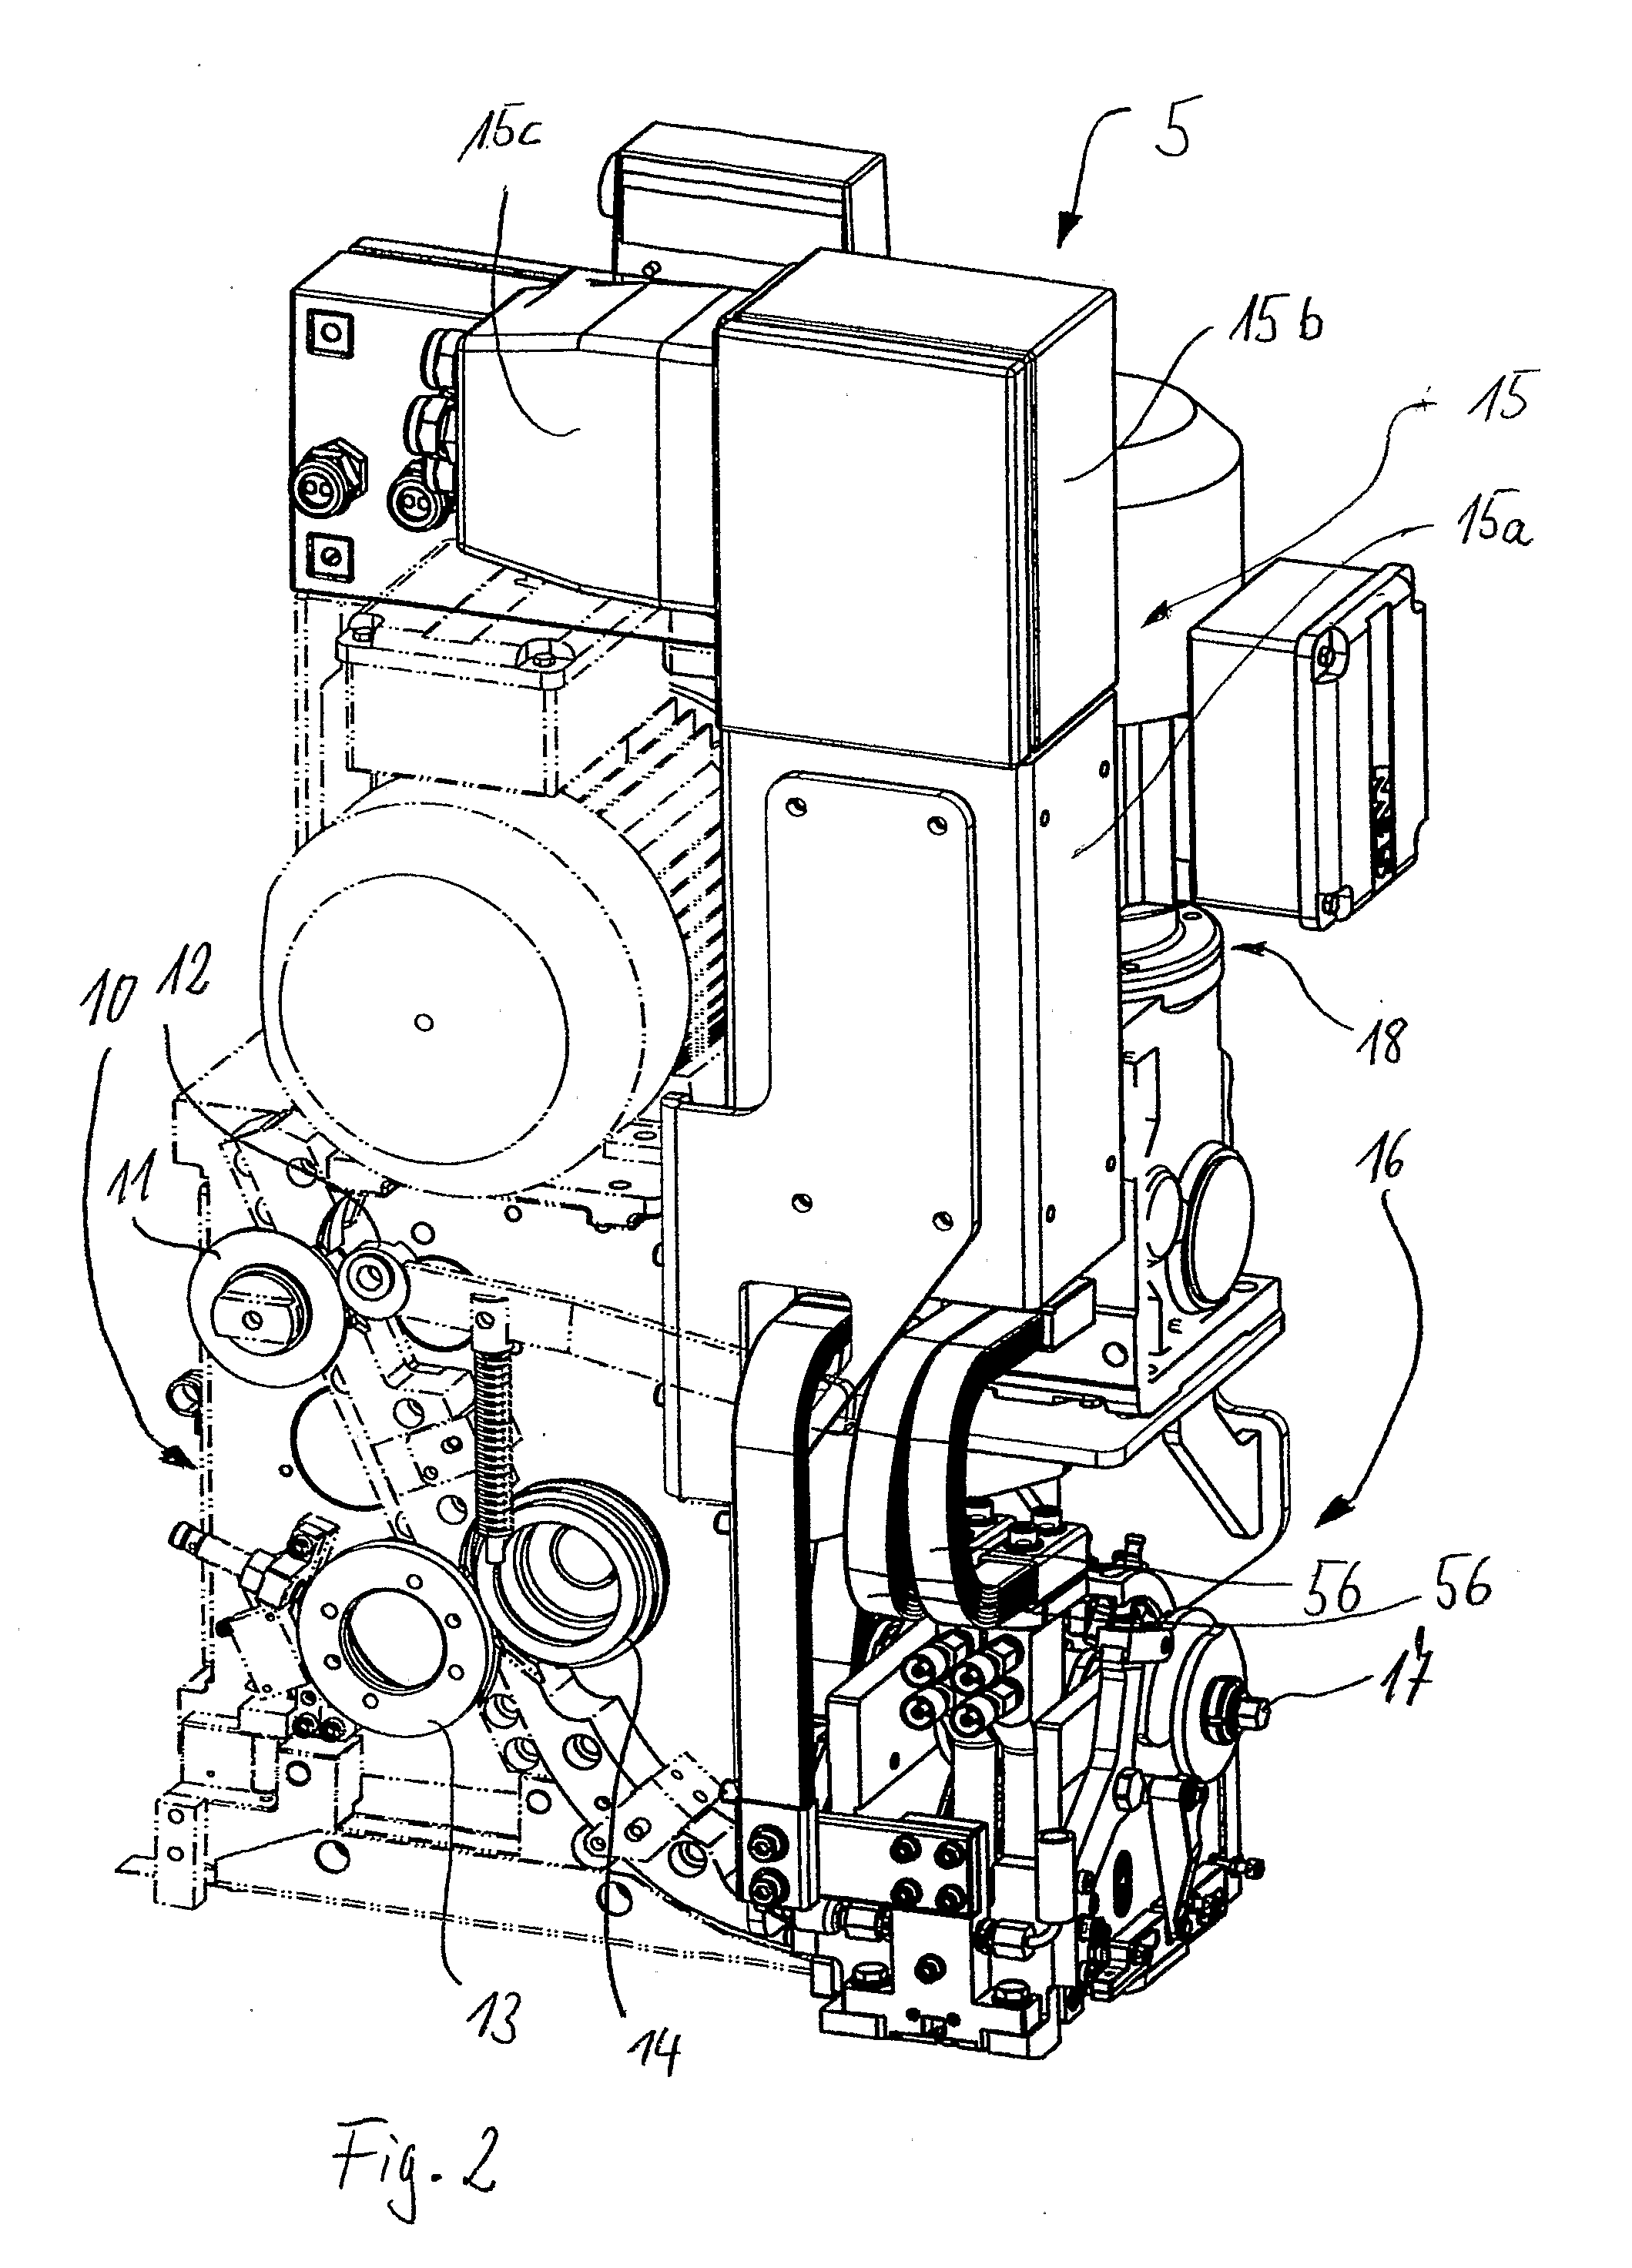 Method and Device for Strapping Goods